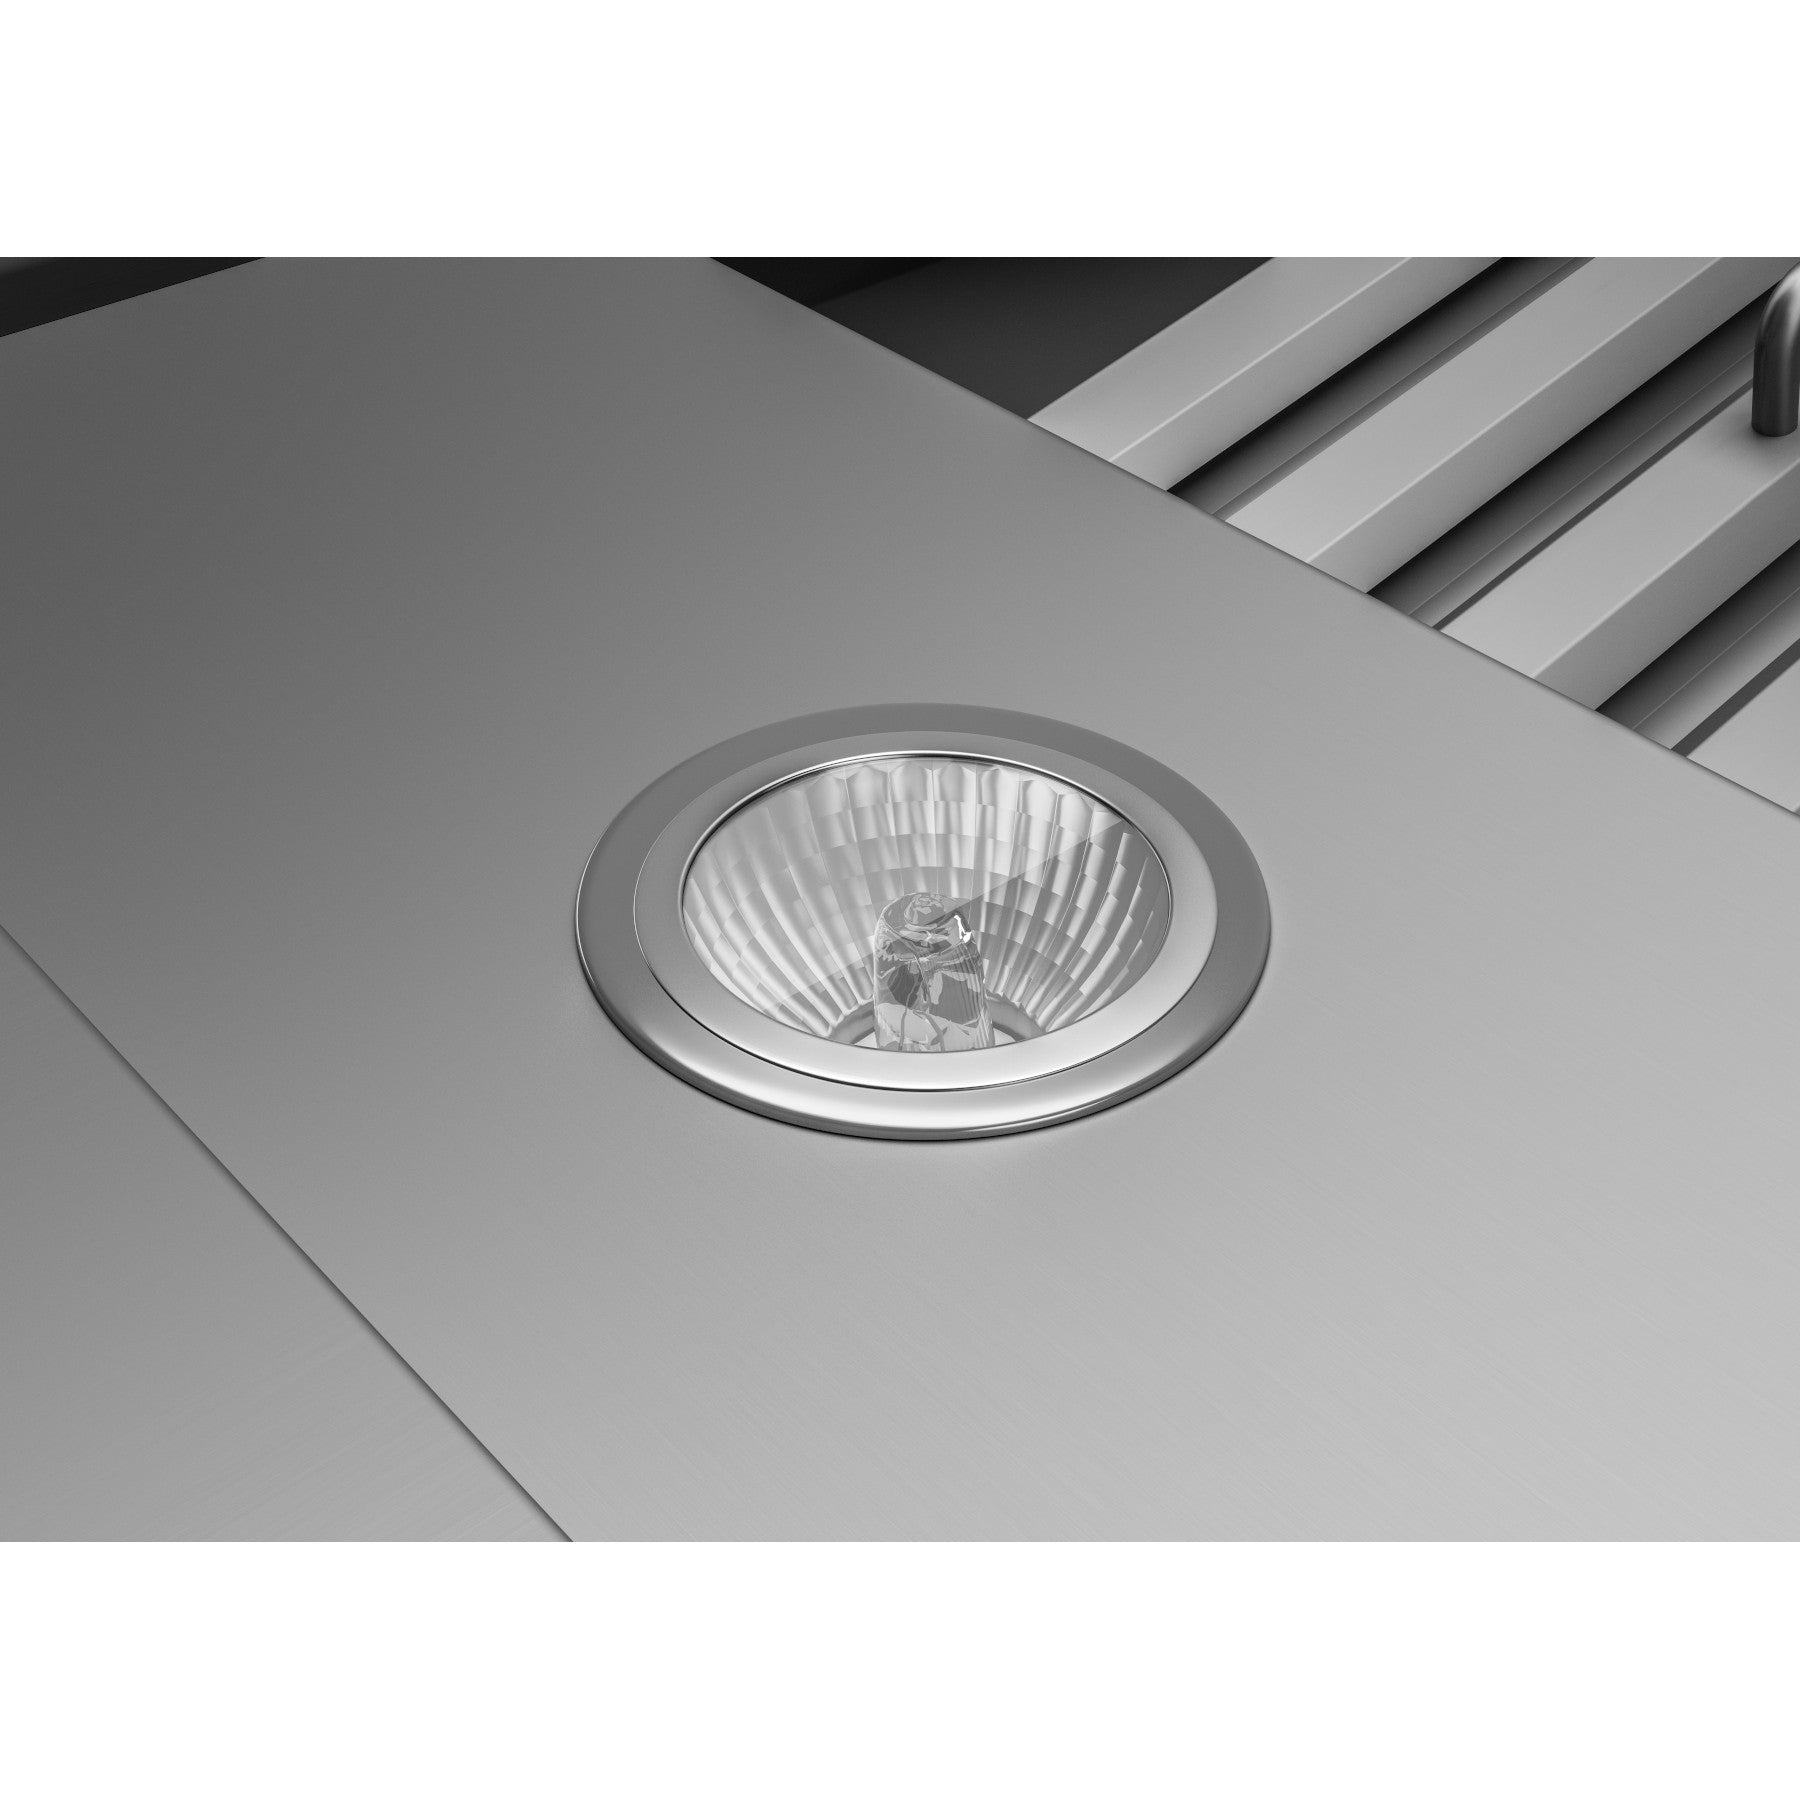 Best - 35.88 Inch Outdoor Range Hood Vent in Stainless - WTD9M36SB